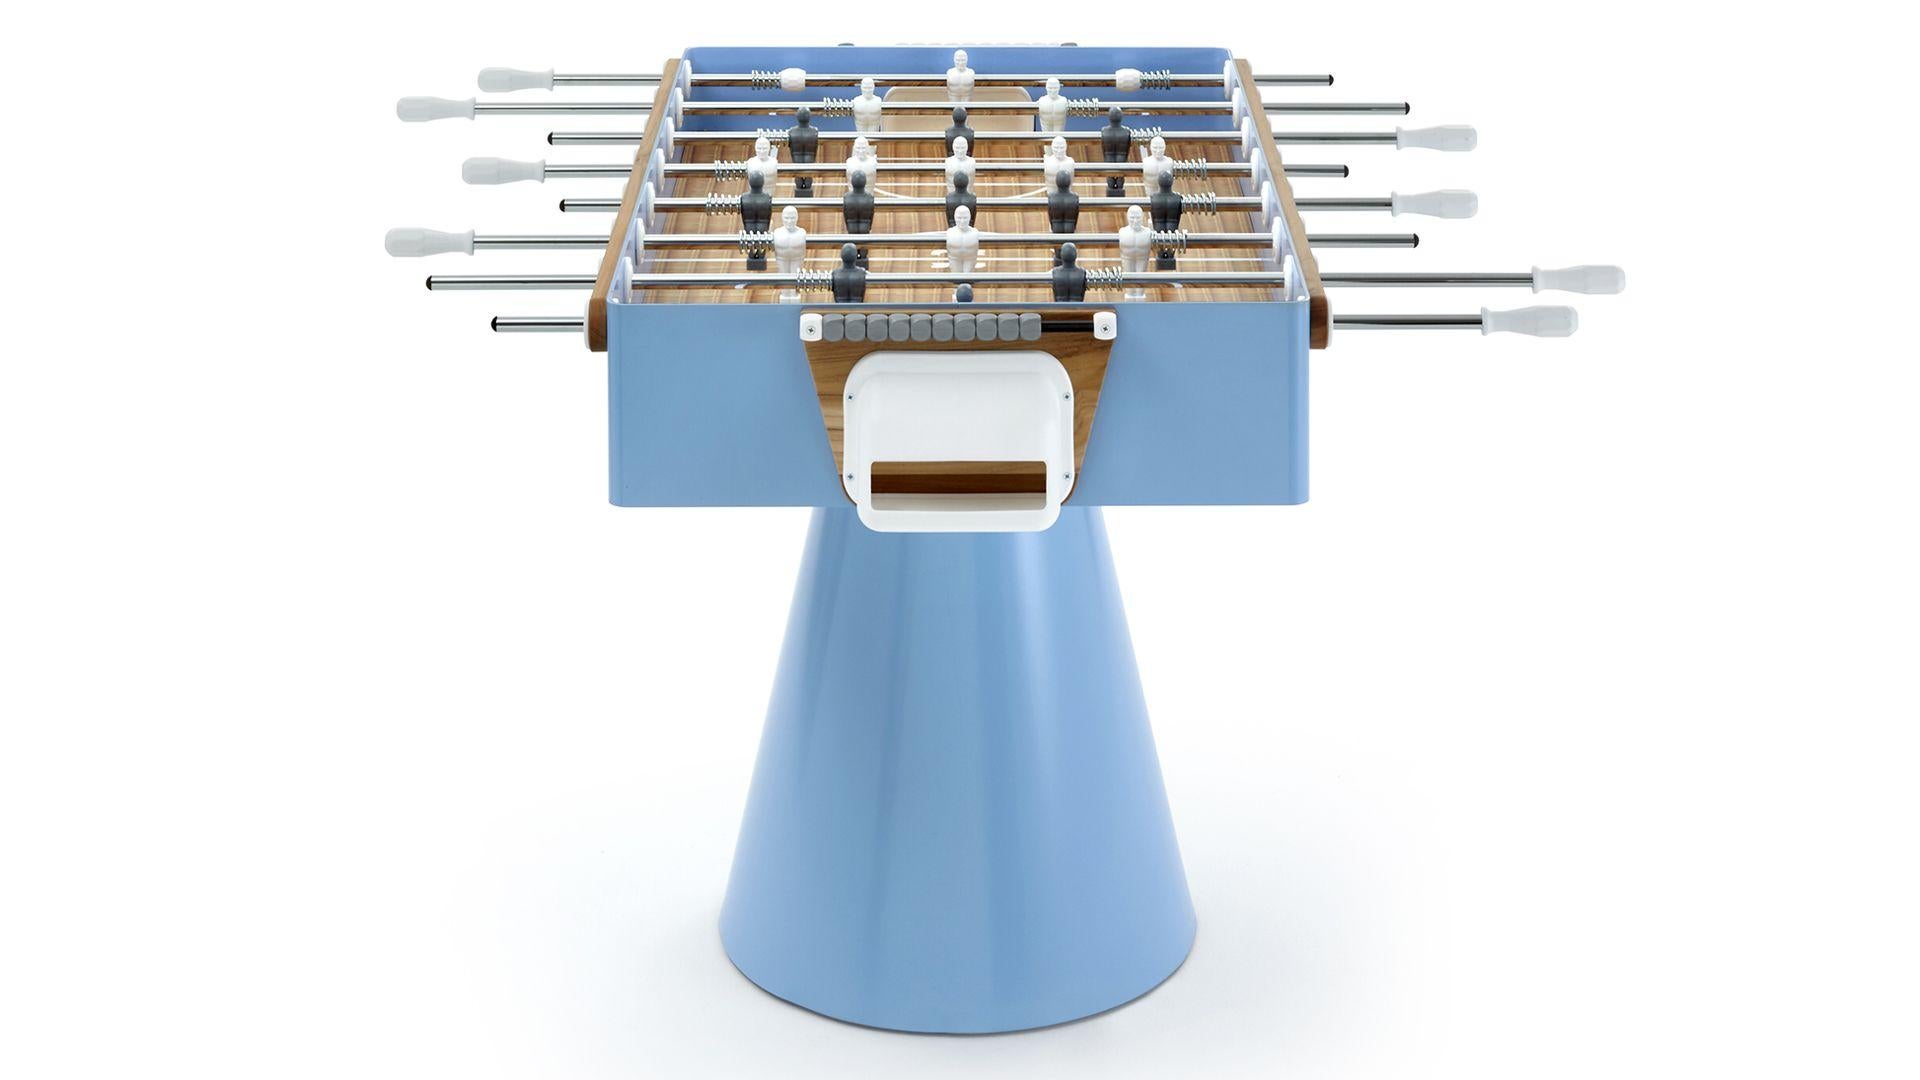 Professional football table called Capri, a special edition inspired by the ‘50 Italian car “spiaggina” (popular in Capri) with a light blue structure, light wooden inserts and a wicker texture printed on the game table. A tribute to Naples and its